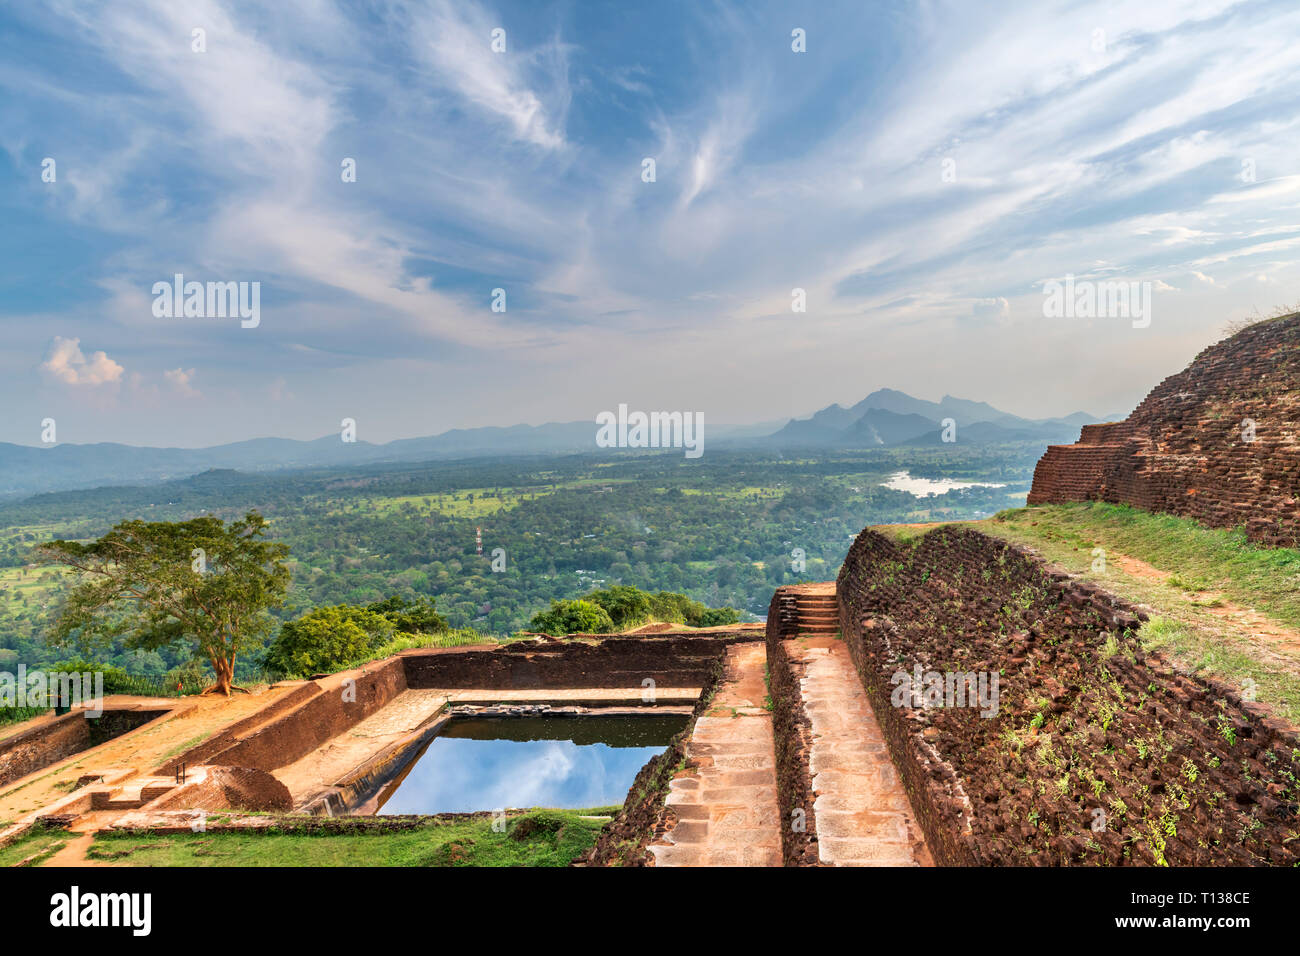 The ancient remains of the fortress on top of Sigiriya built by King Kassapa, who killed his father and feared revenge from his brother. Stock Photo